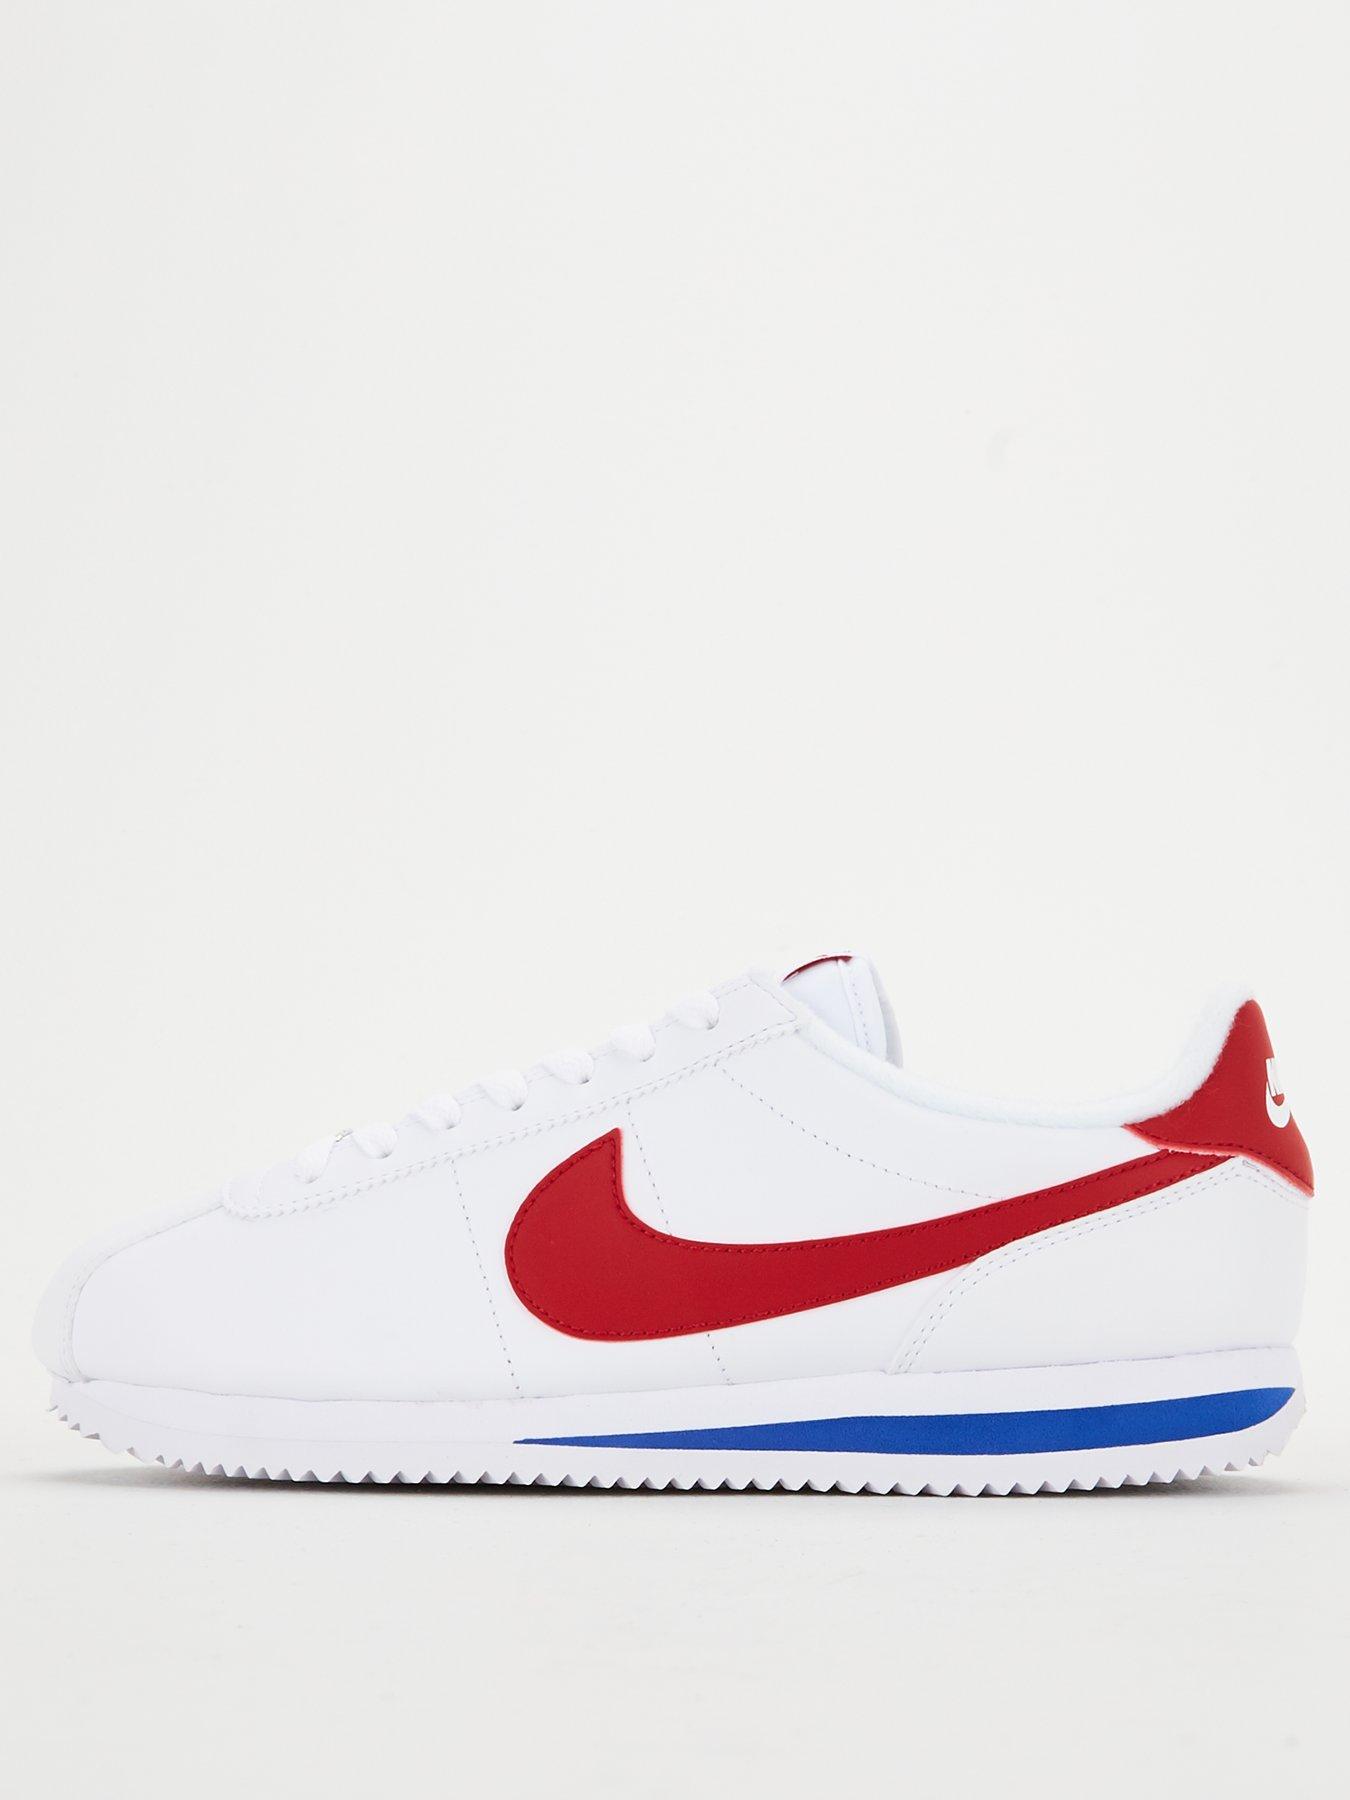 cortez blue and red